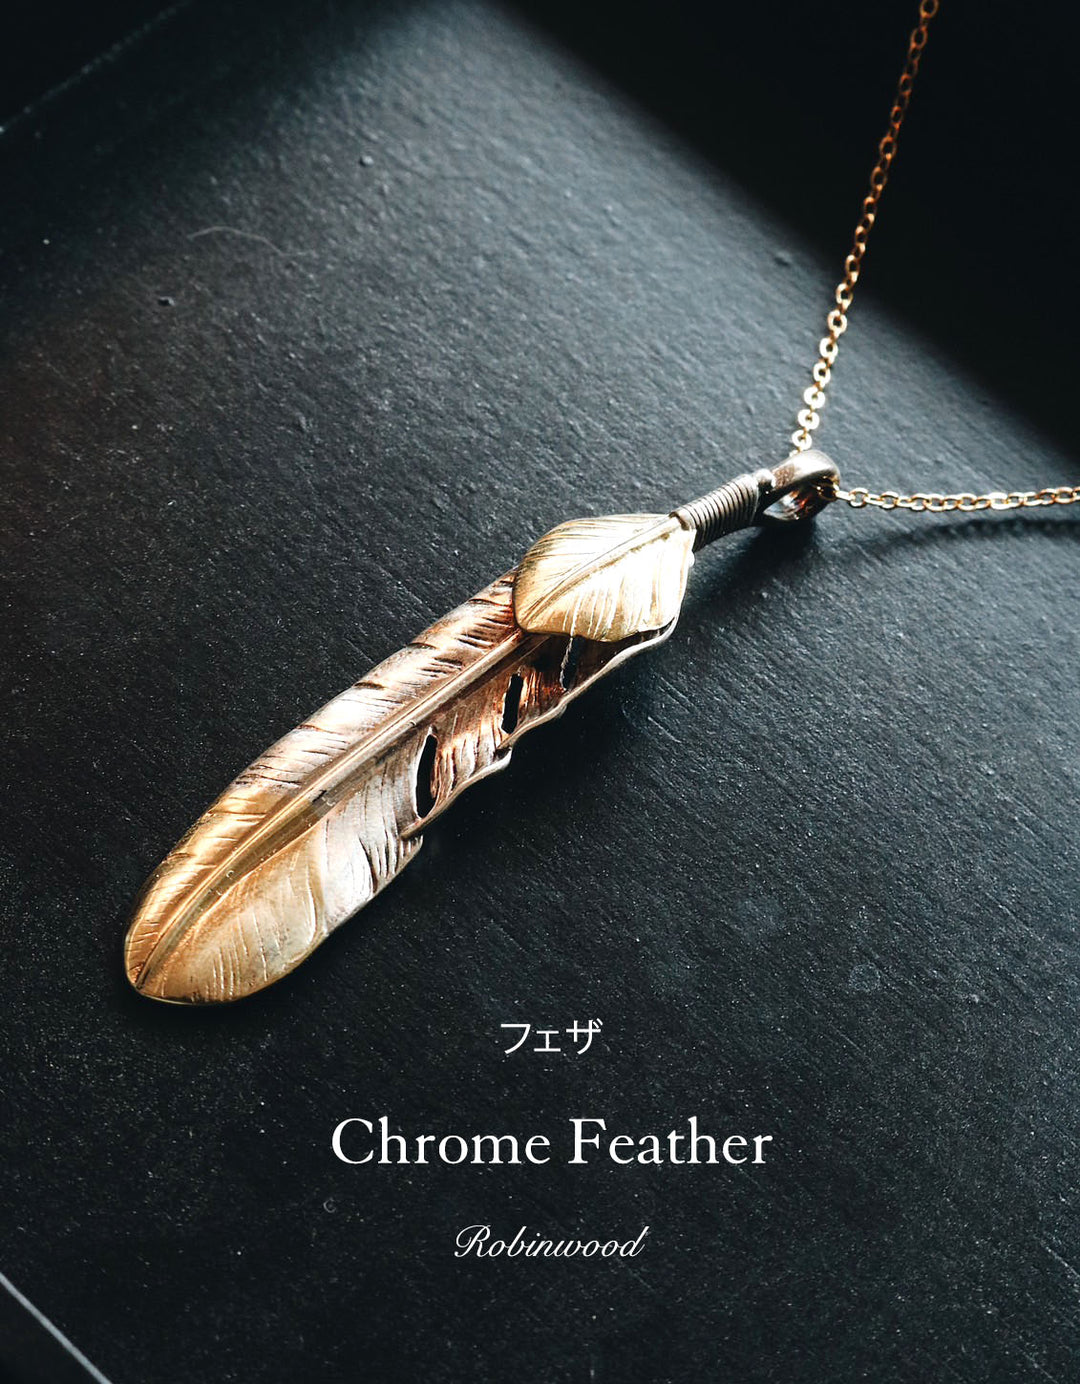 Limited Men Collection's " Chrome Feather Necklace ", Robinwood Men Series